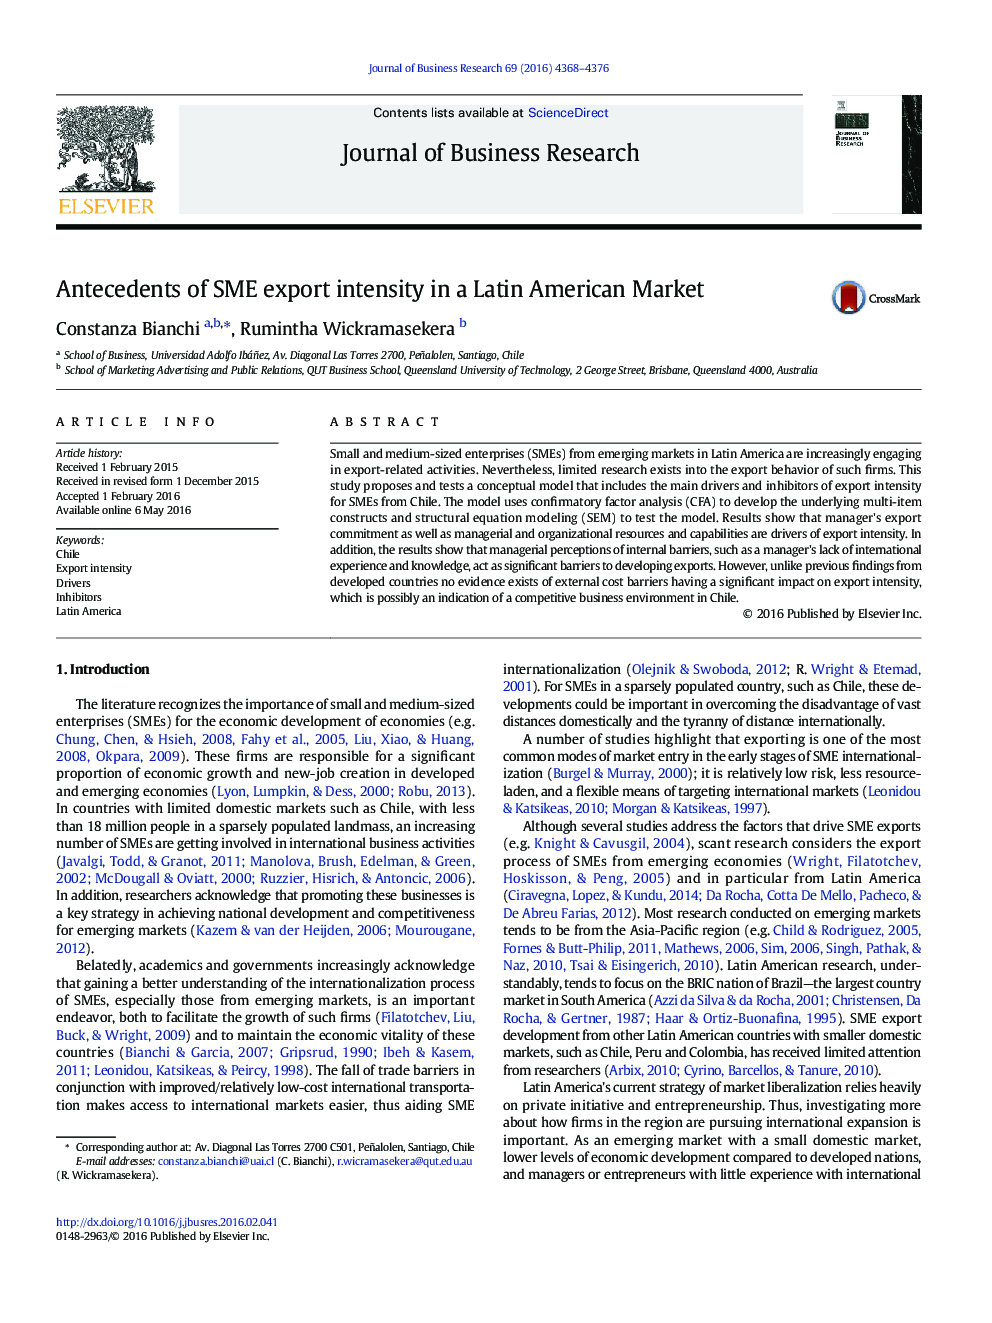 Antecedents of SME export intensity in a Latin American Market